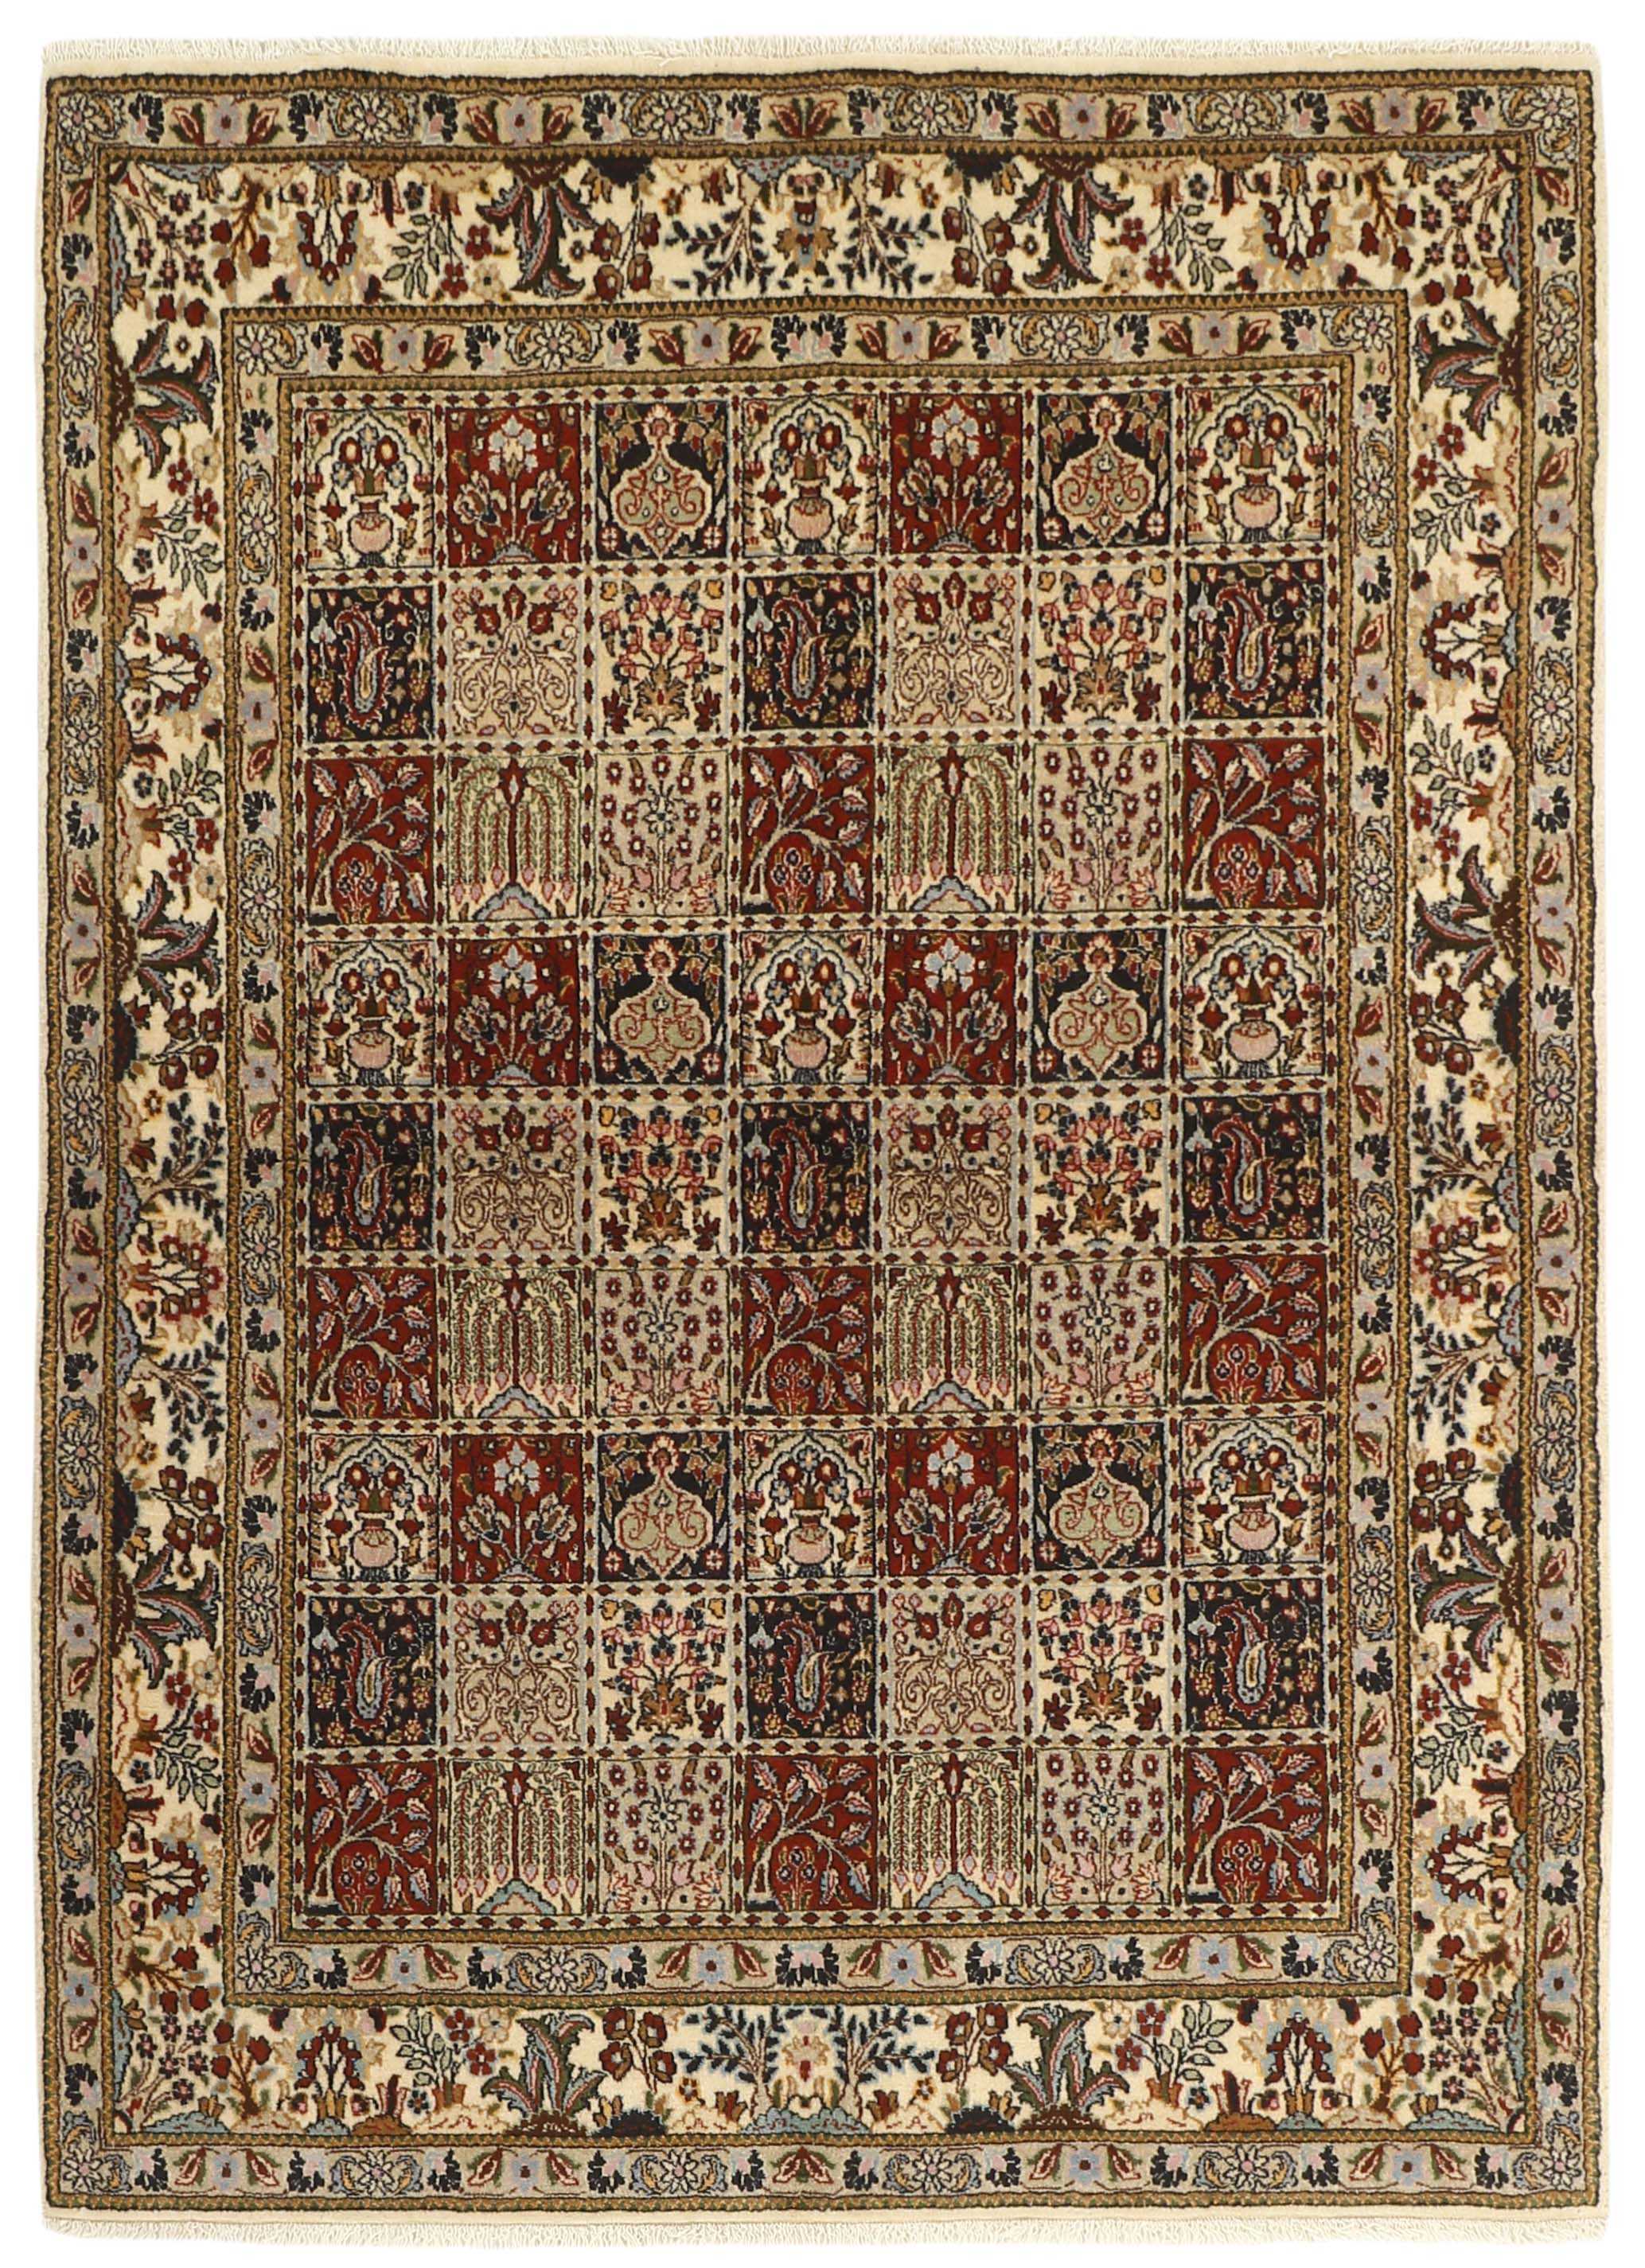 authentic persian rug with floral pattern in beige, blue and red